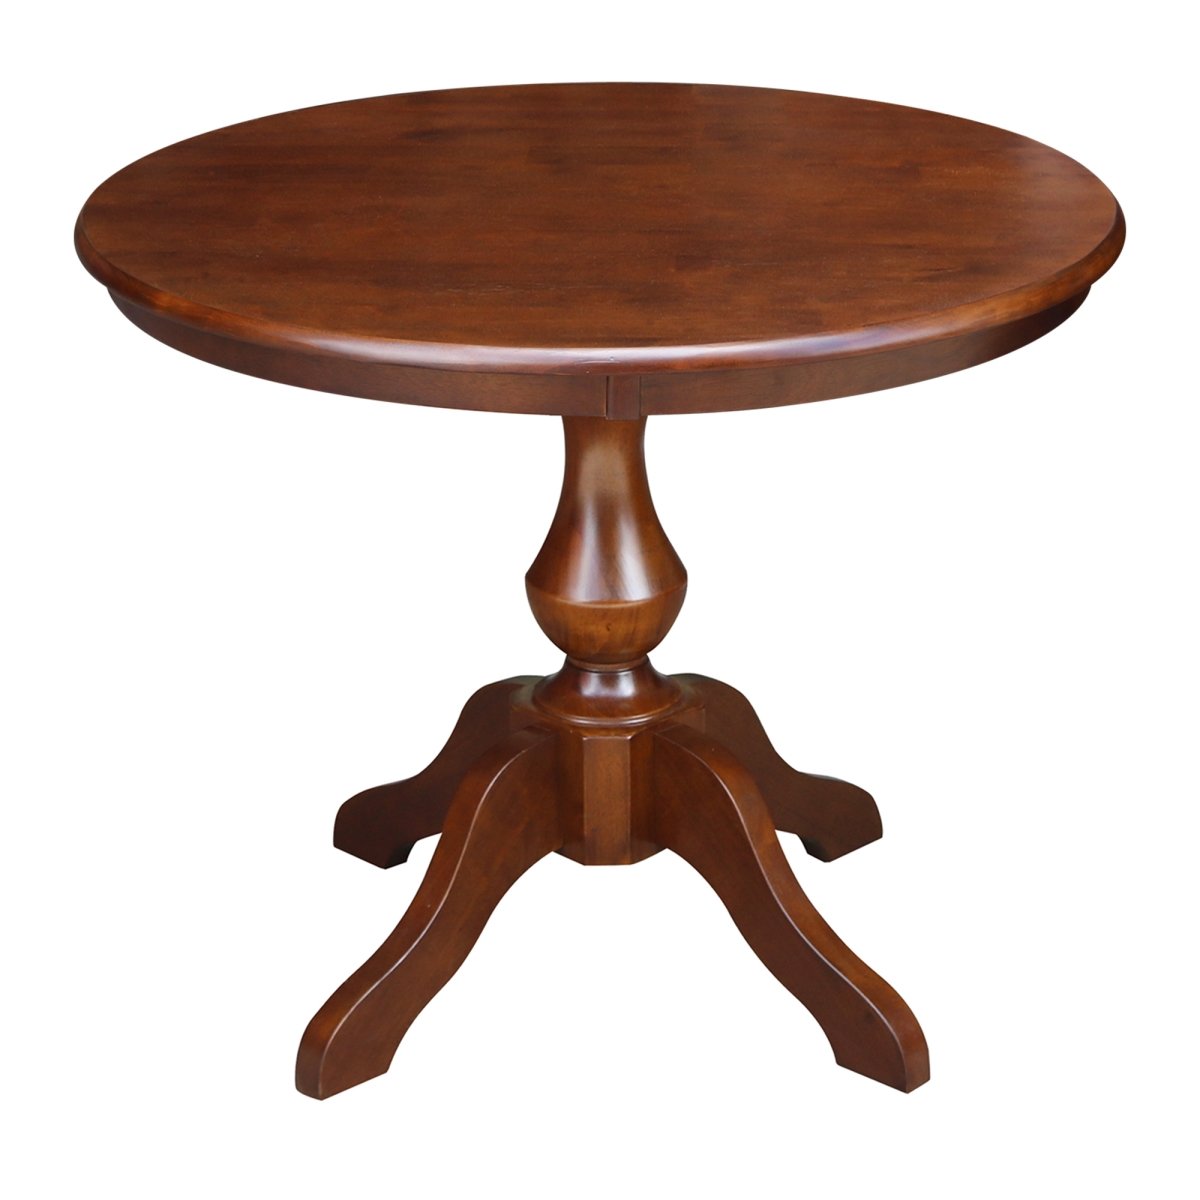 K581-36rt-11b 28.9 X 36 In. Round Top Pedestal Dining Table - Espresso